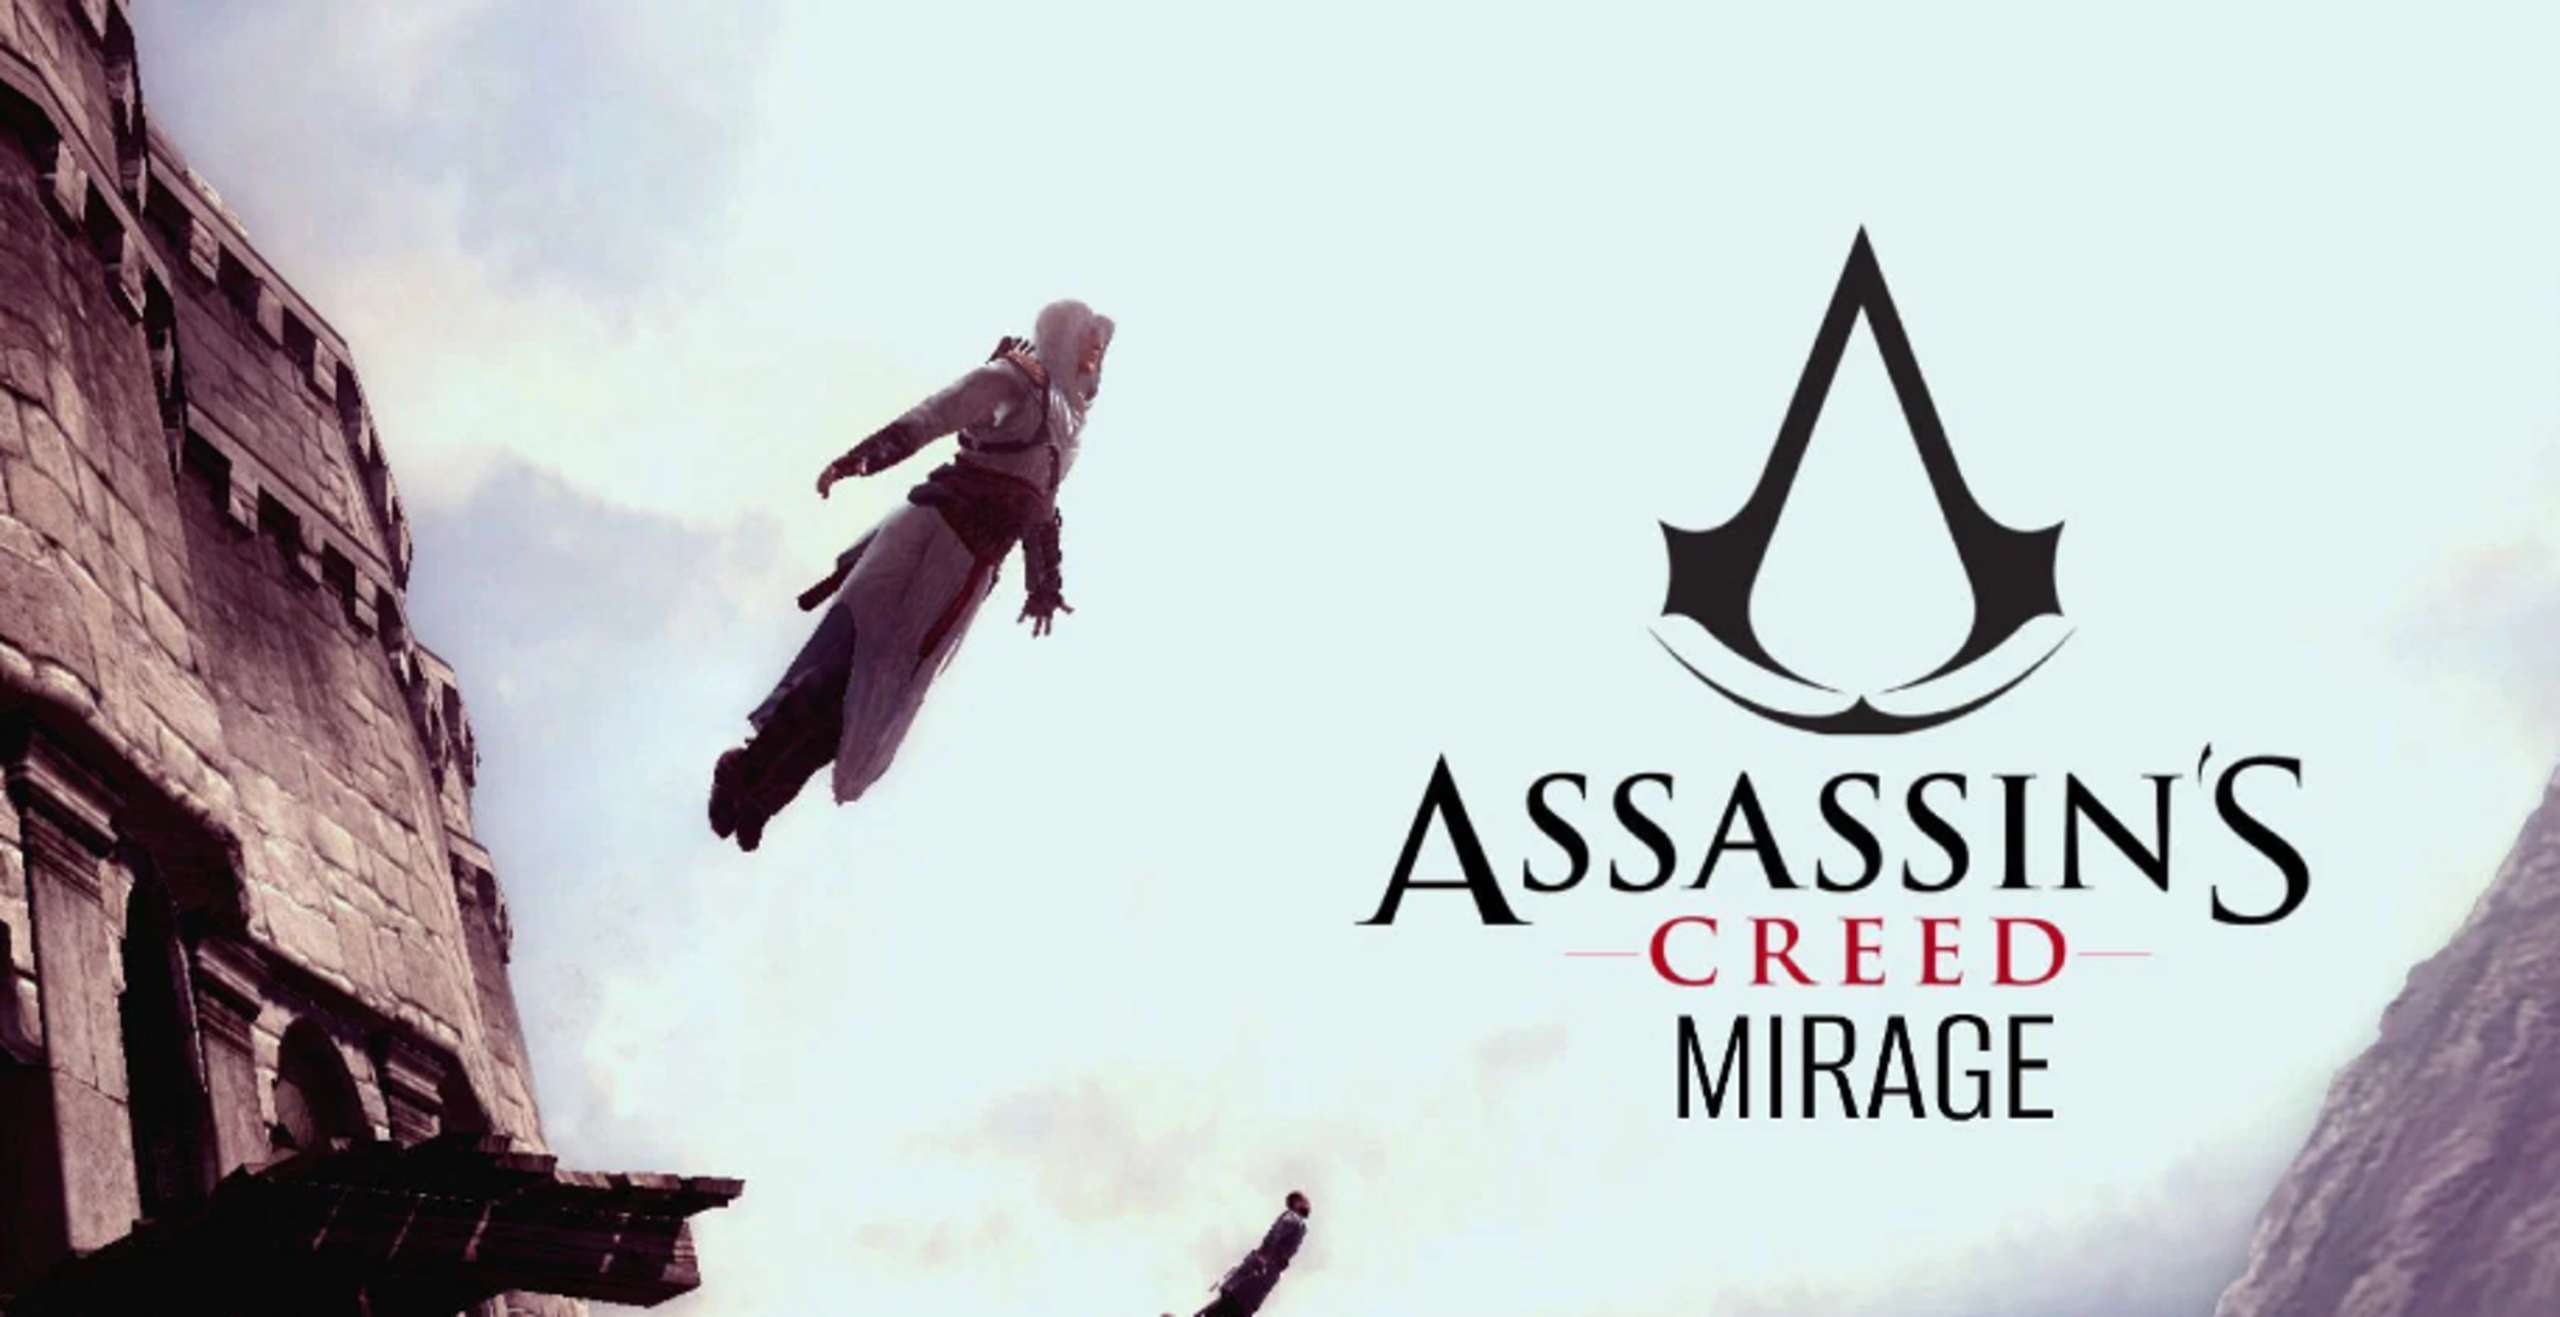 Ubisoft Has Publicly Revealed Assassin’s Creed Mirage, With The Full Release Scheduled On September 10